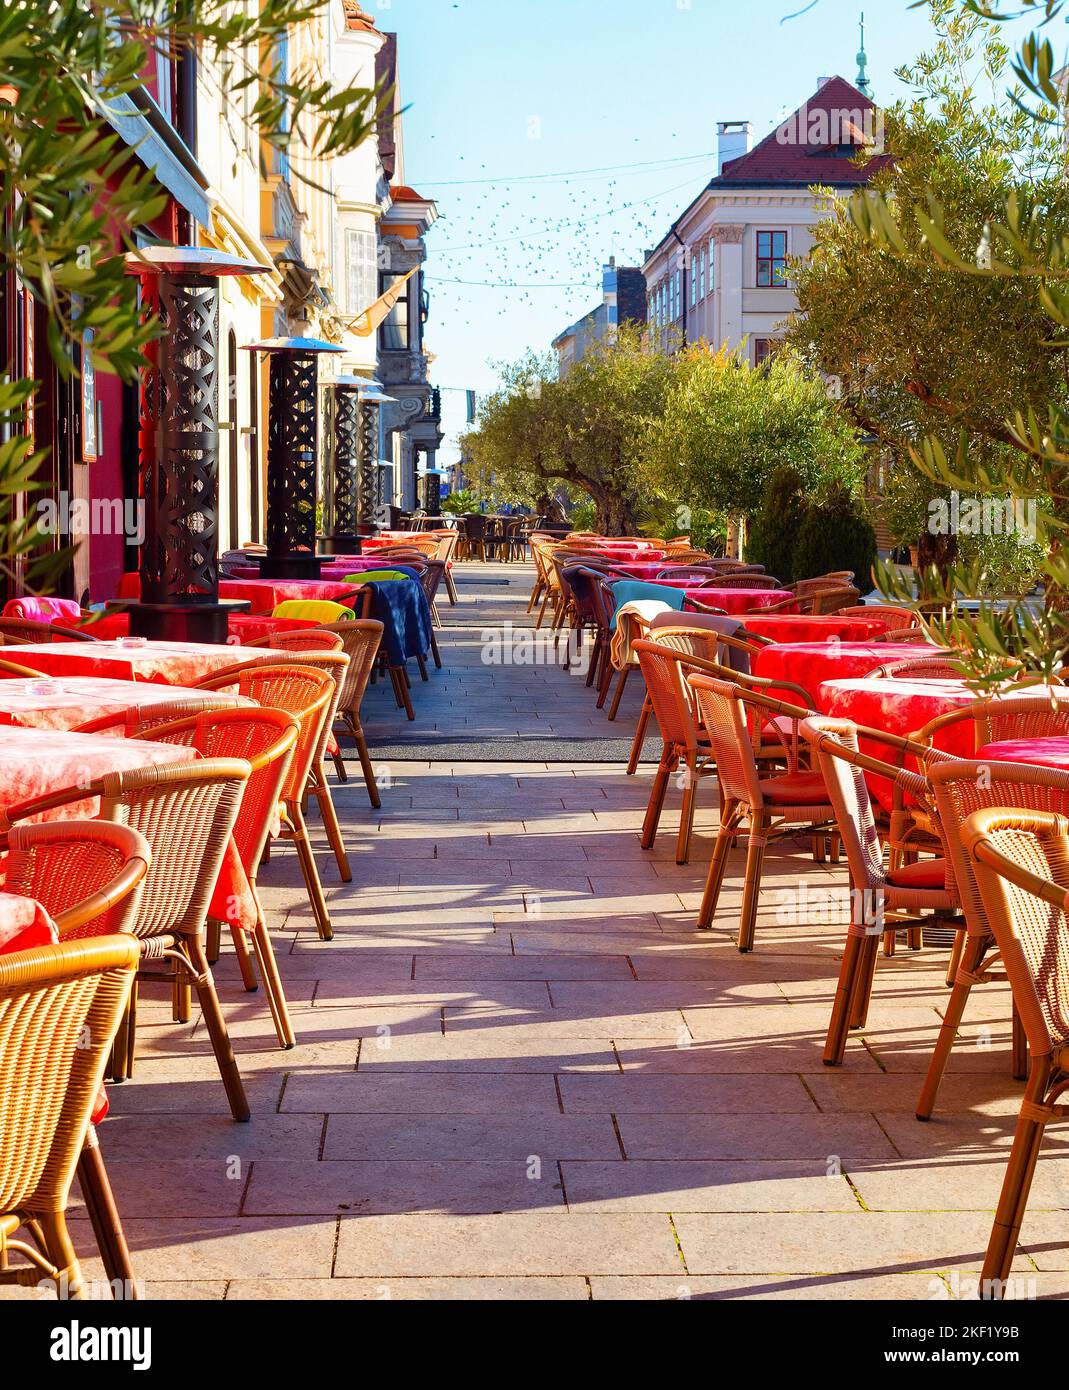 Tables with red cloths on outdoor terrace of restaurant on touristic street, Gyor, Hungary Stock Photo